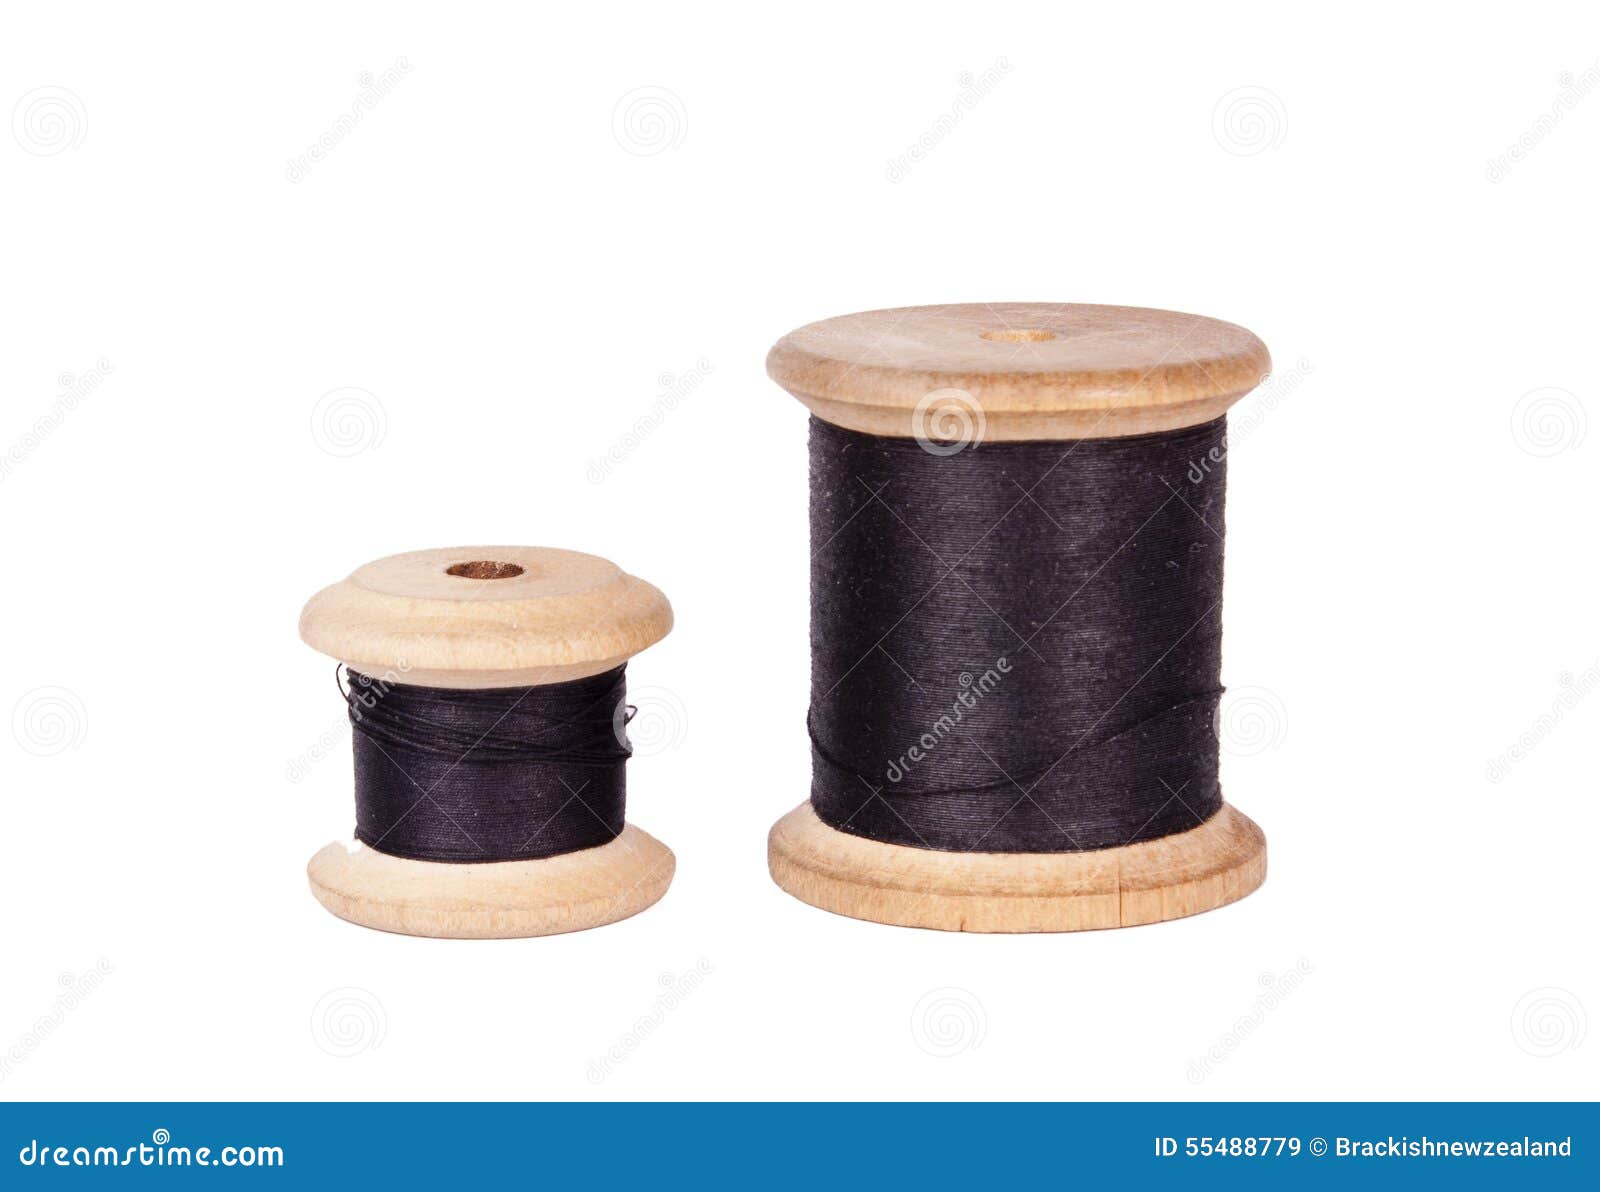 Wooden spools of thread isolated on white background.